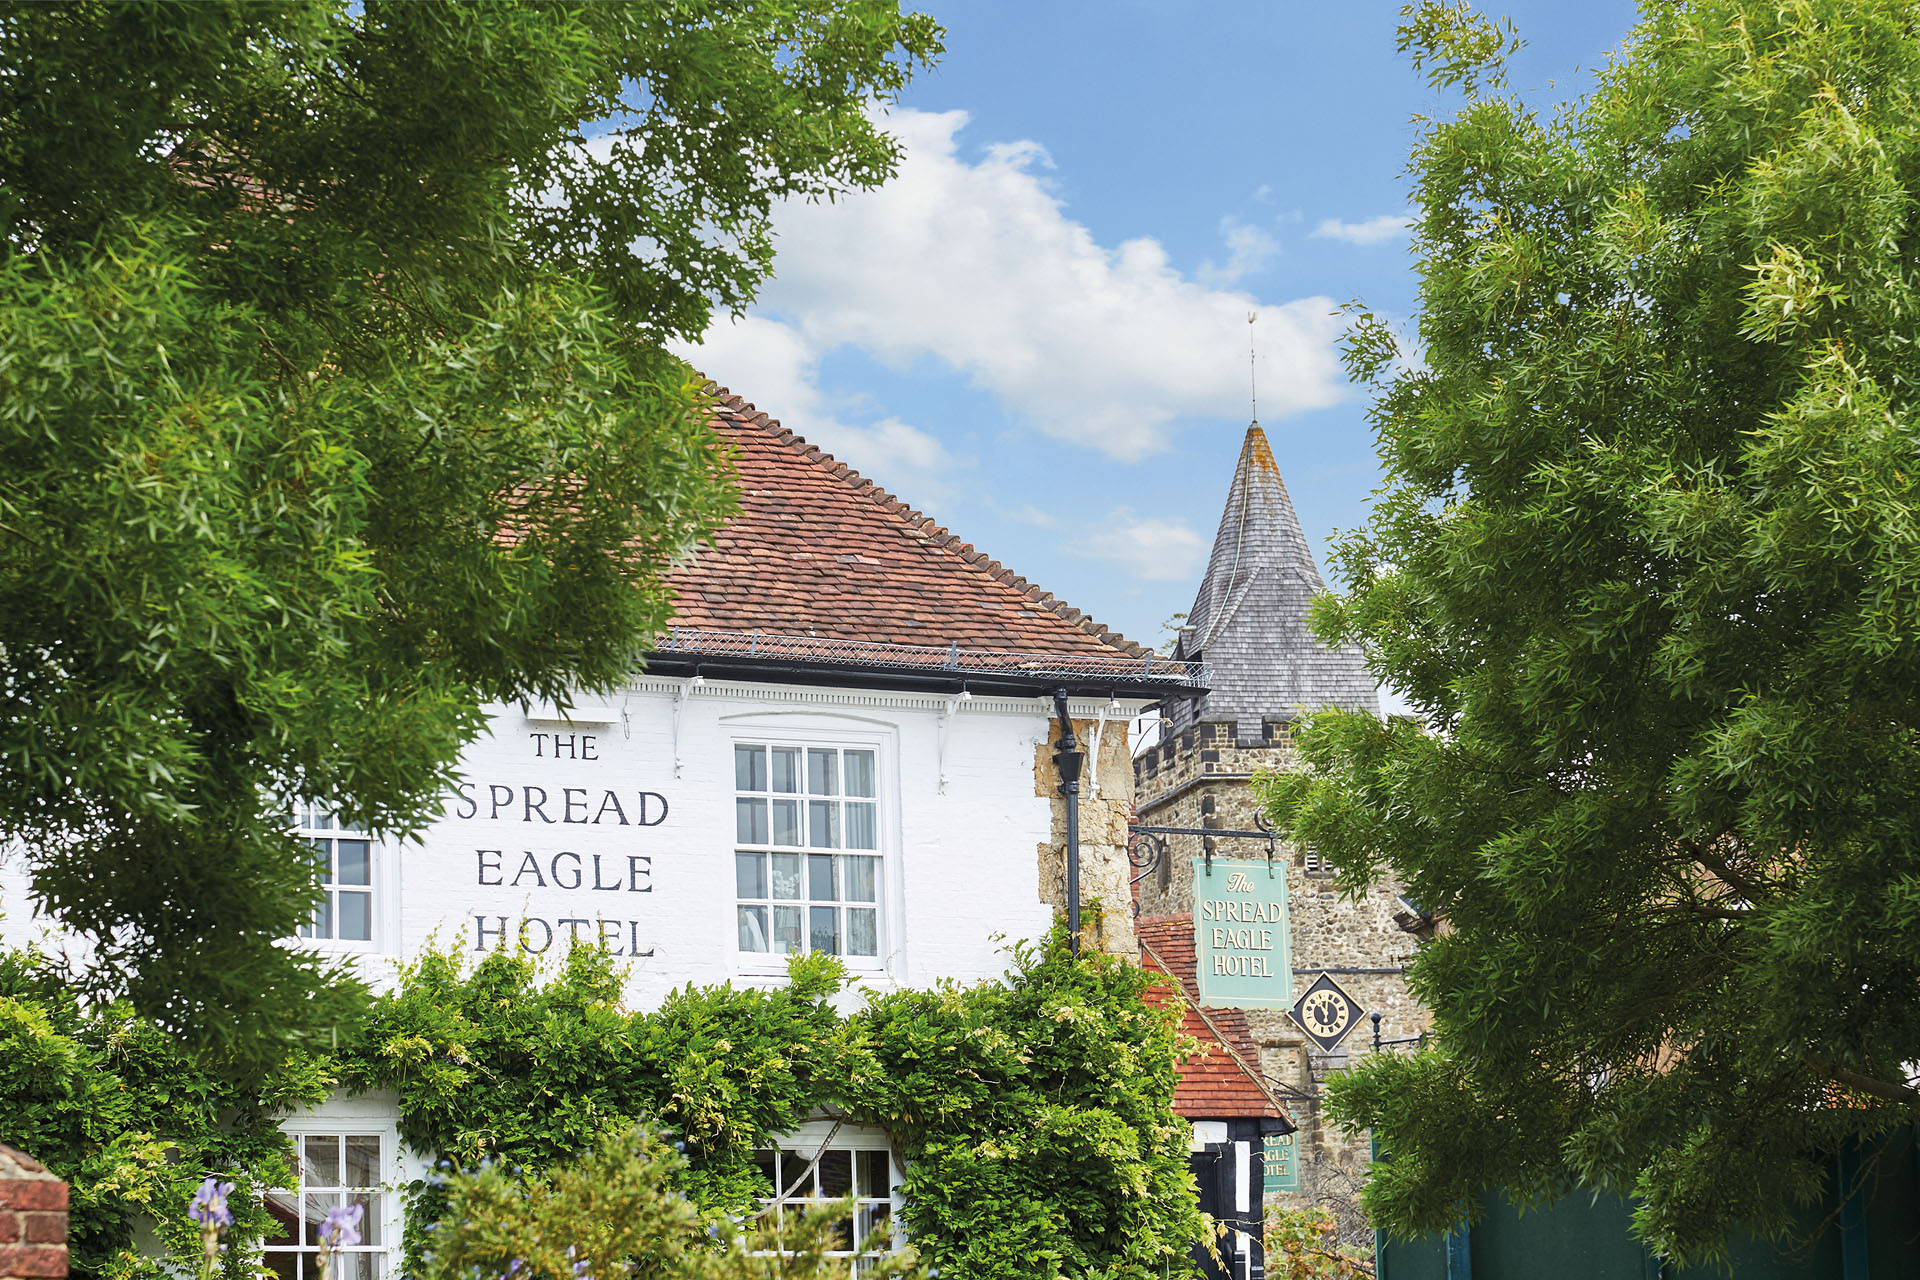 Best Hotels in West Sussex - The Spread Eagle